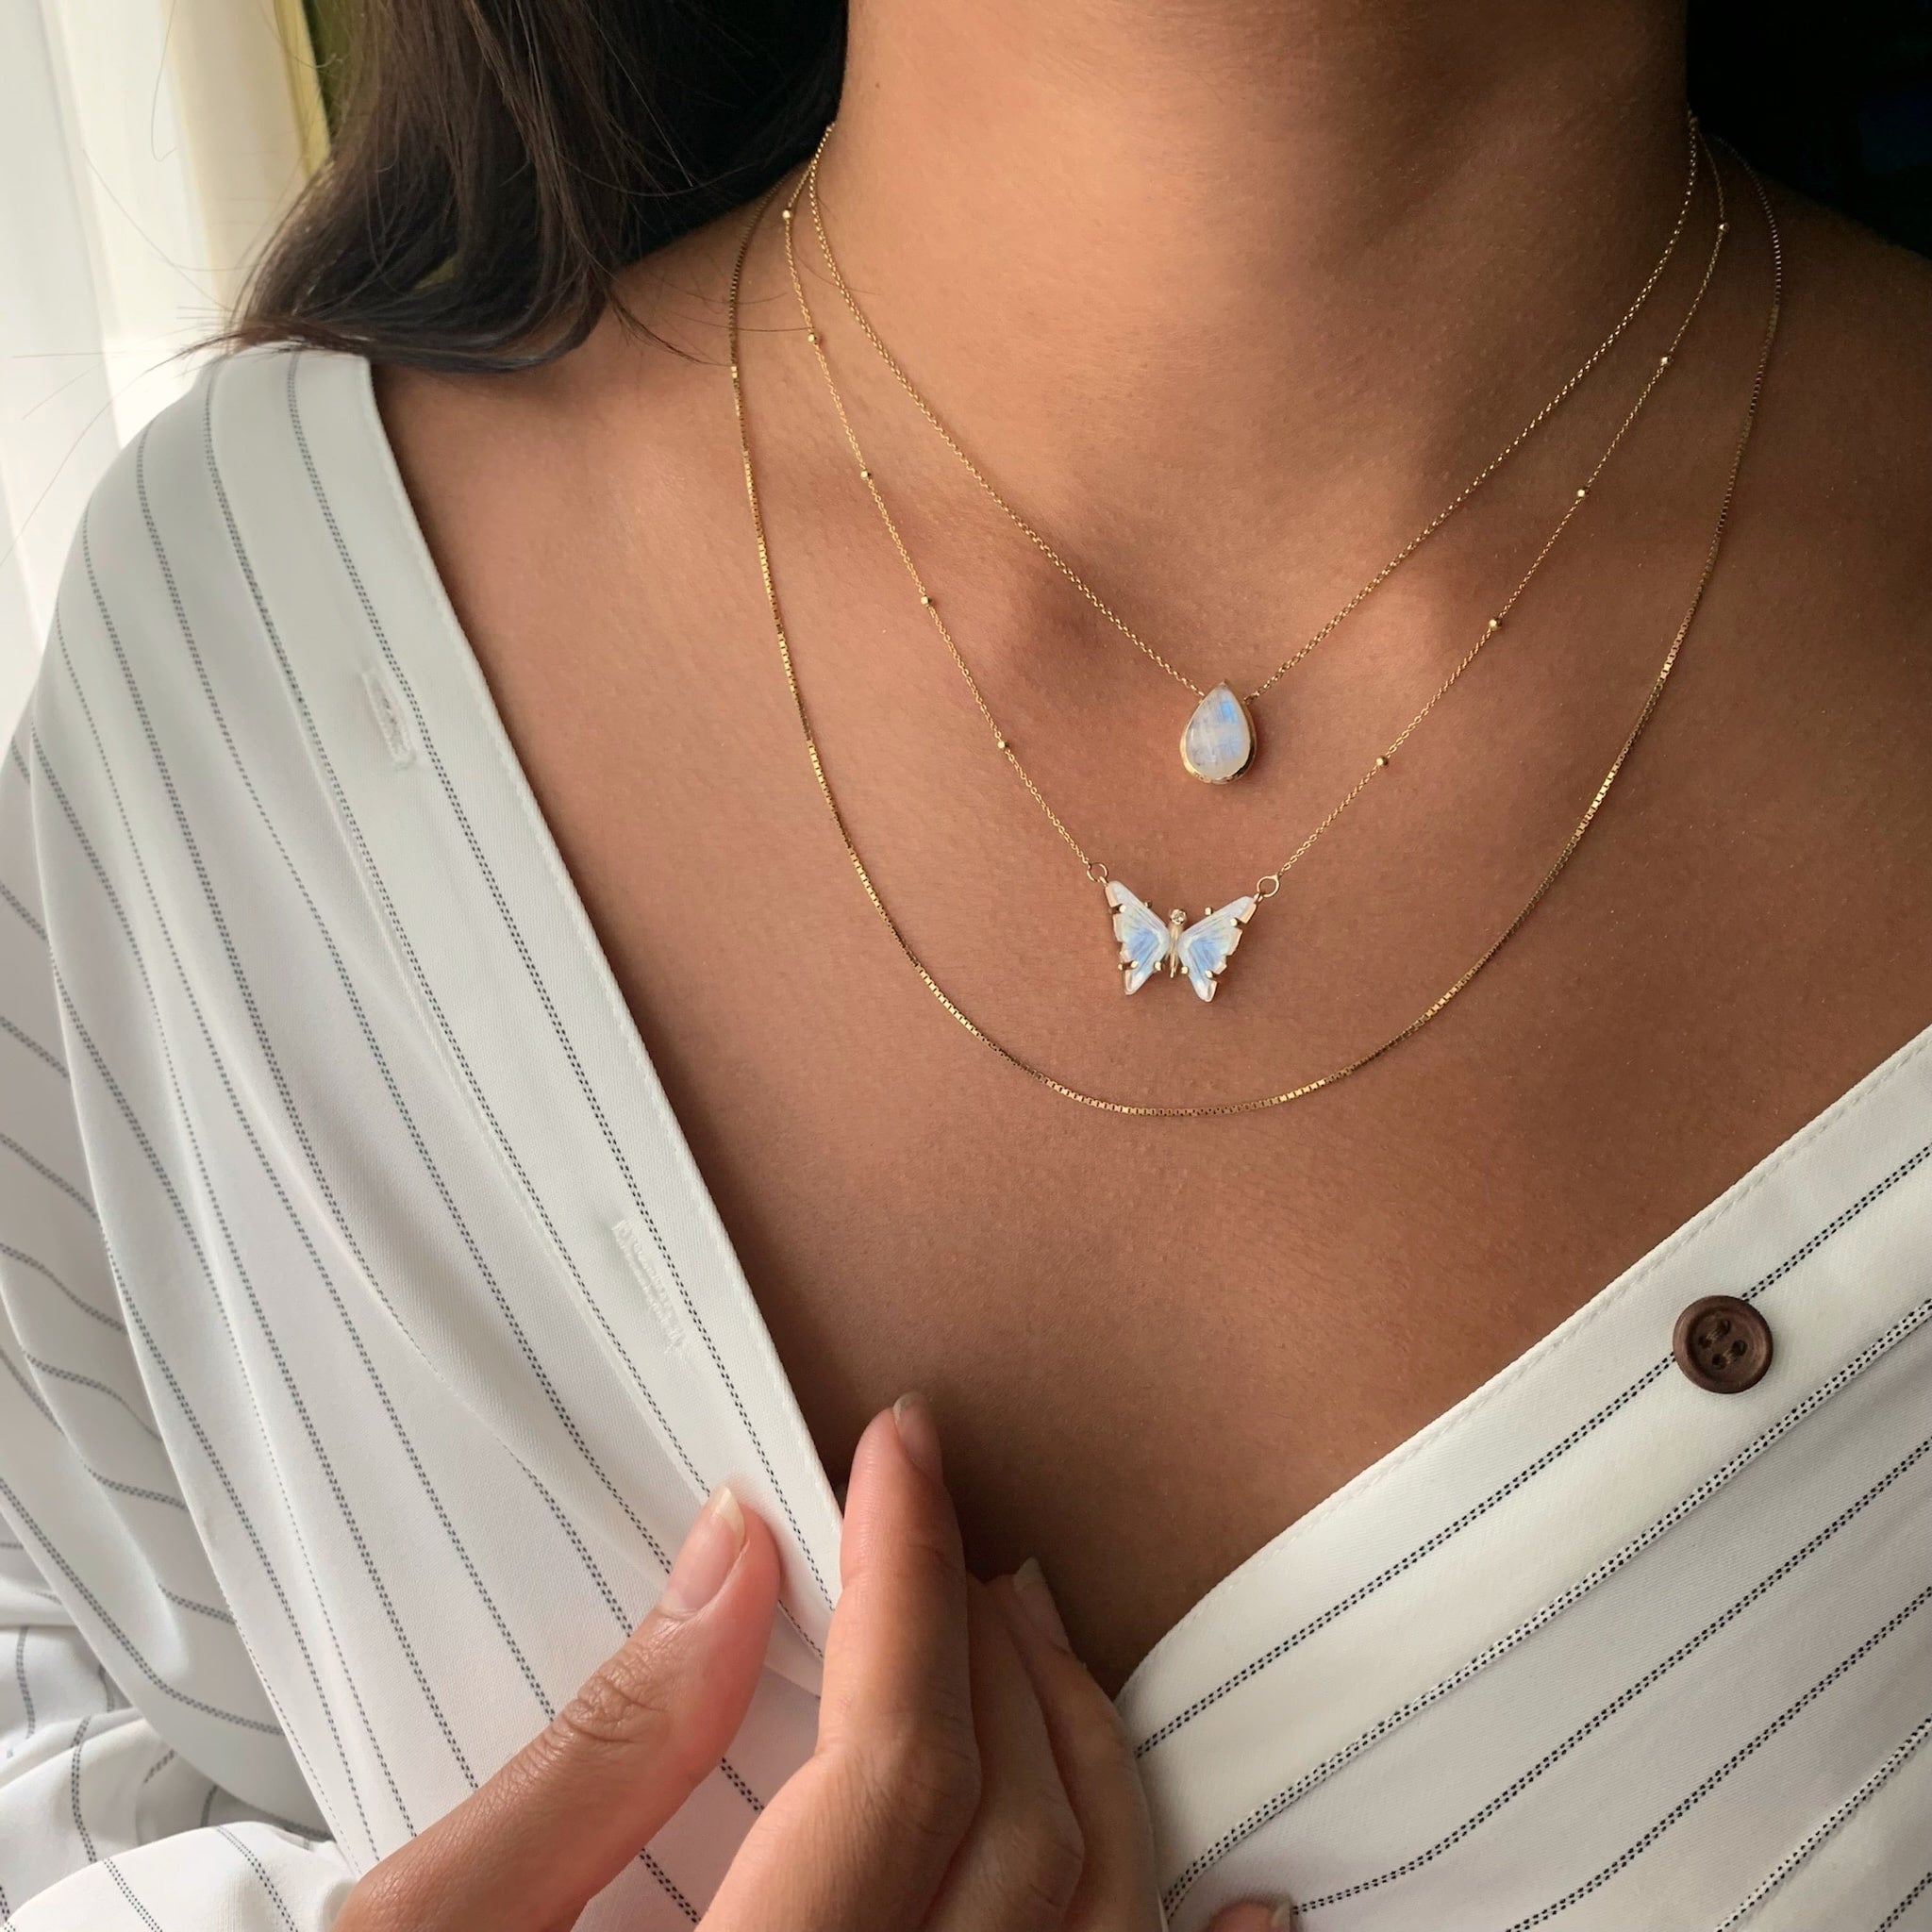 Moonstone Butterfly Satellite Necklace